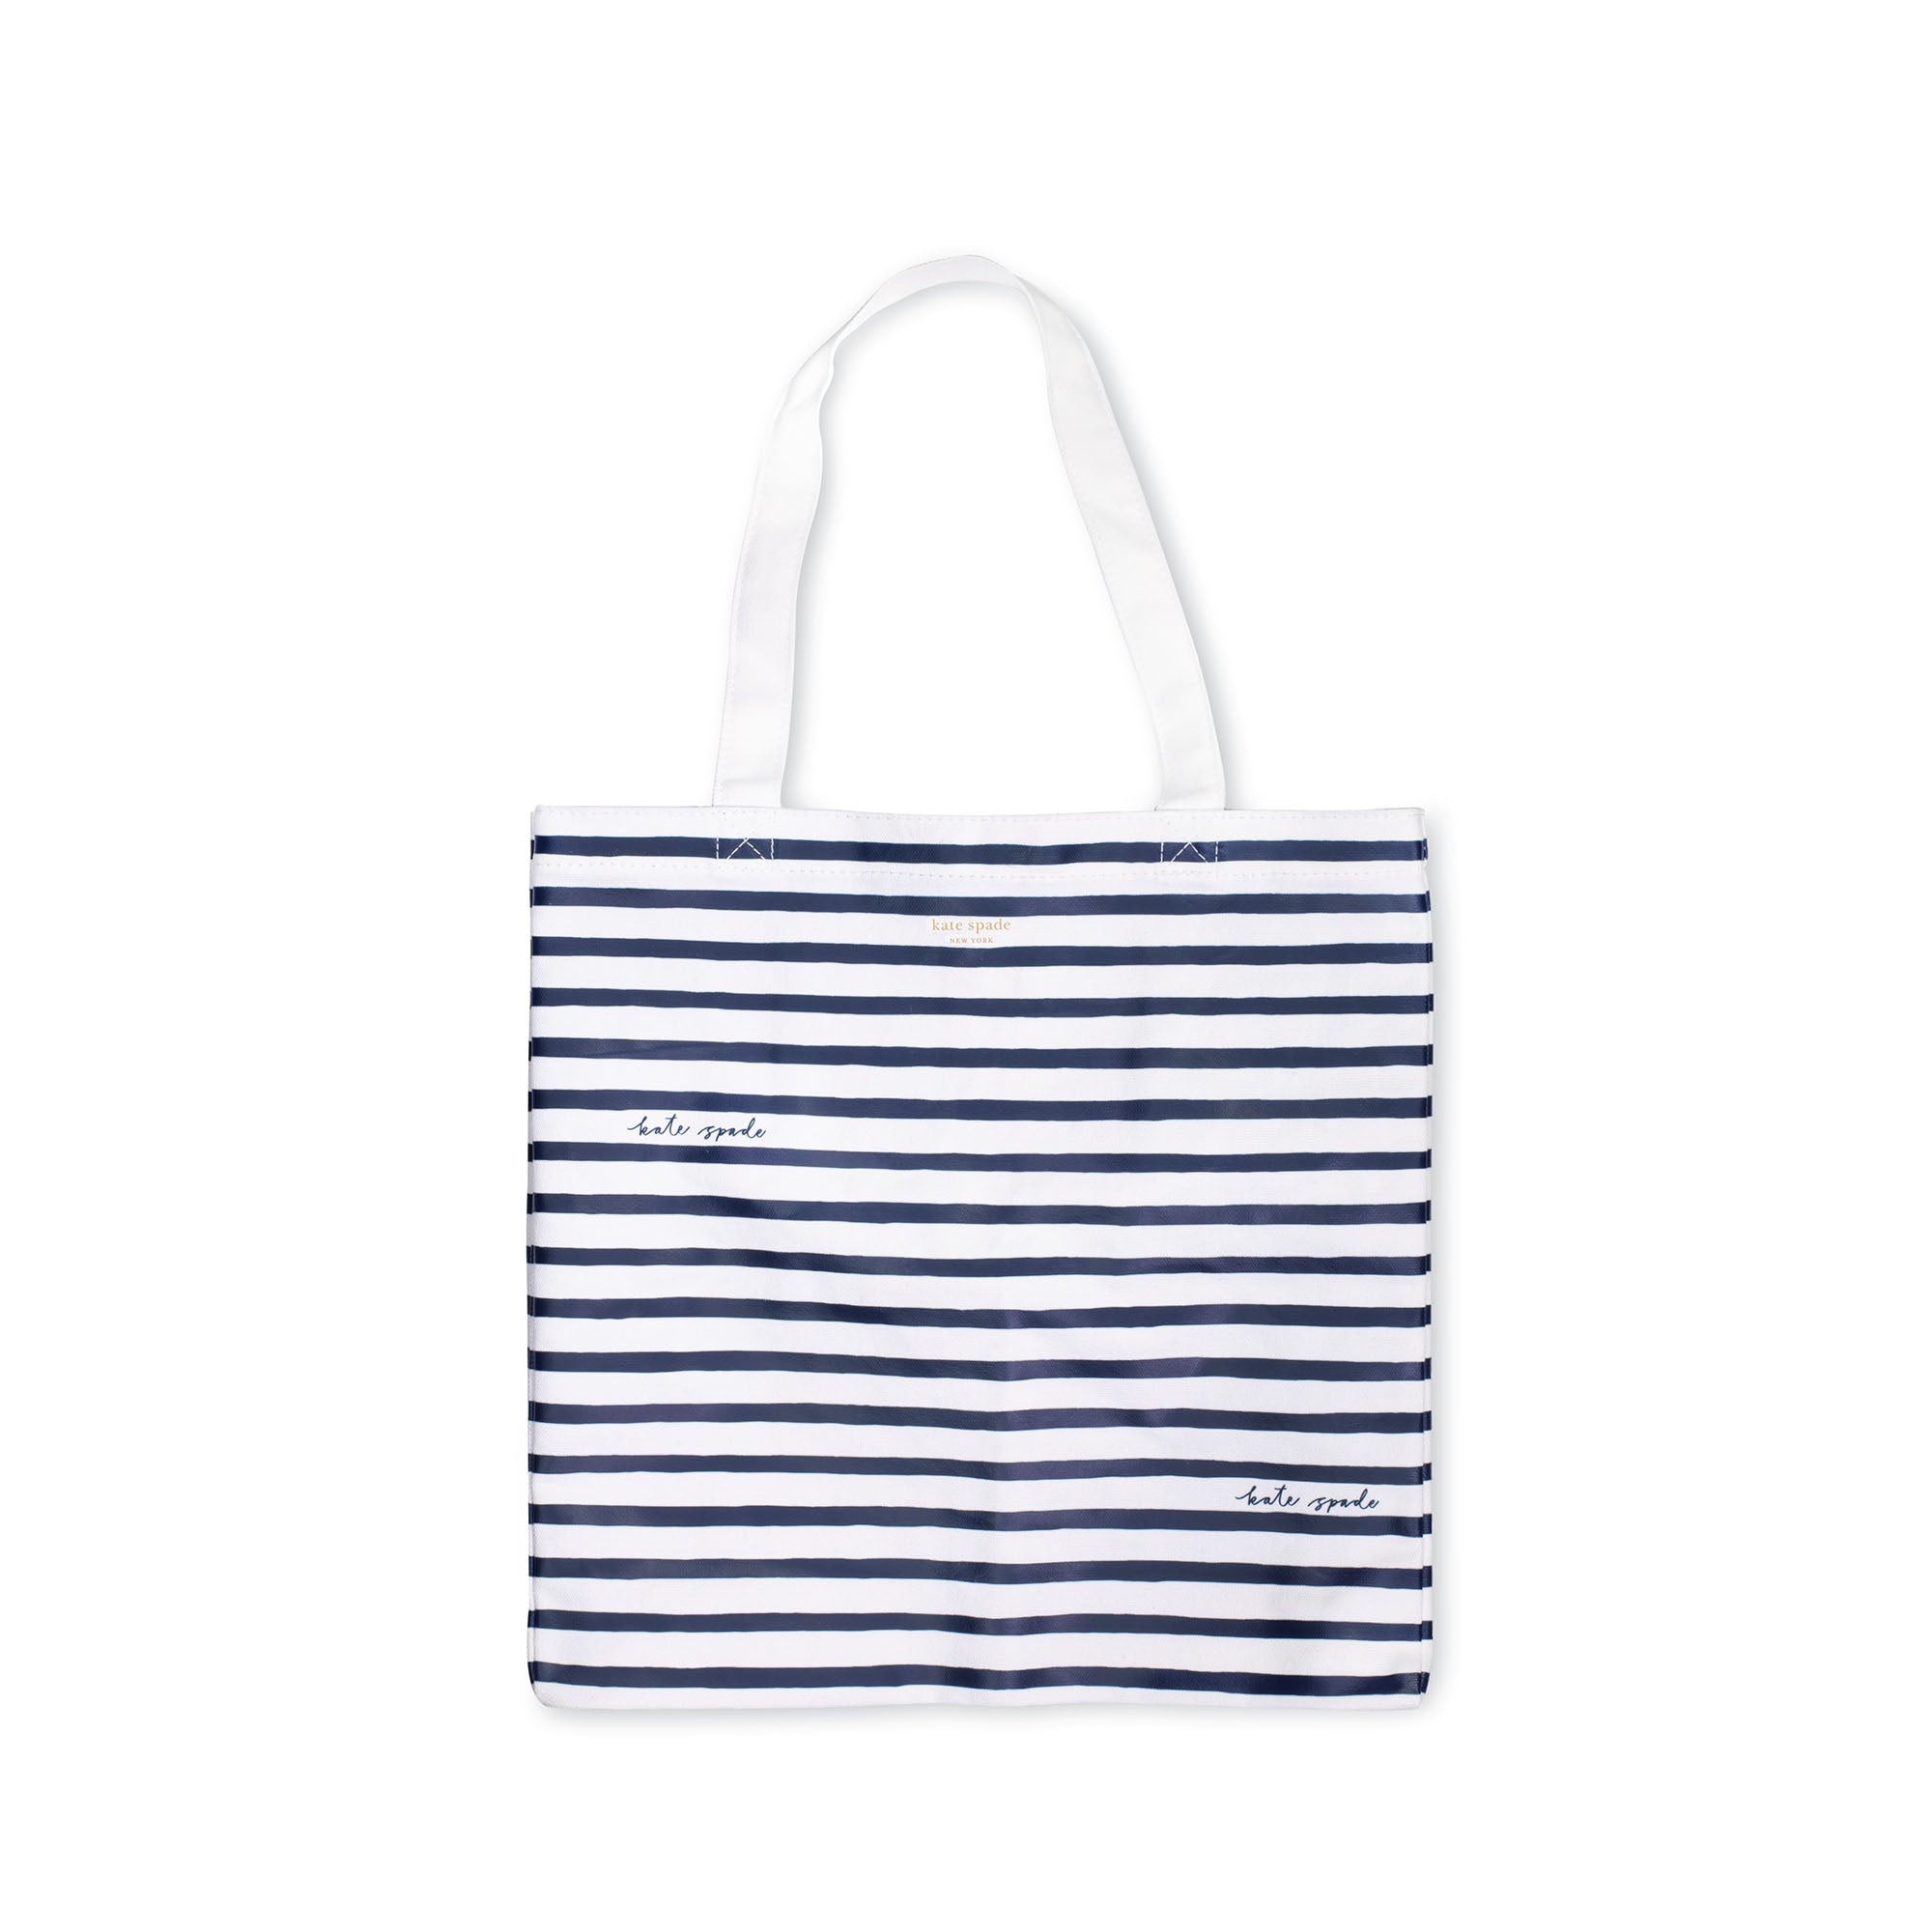 The New Yorker Tote - New Yorker Eco Bag Transparent PNG - 692x600 - Free  Download on NicePNG